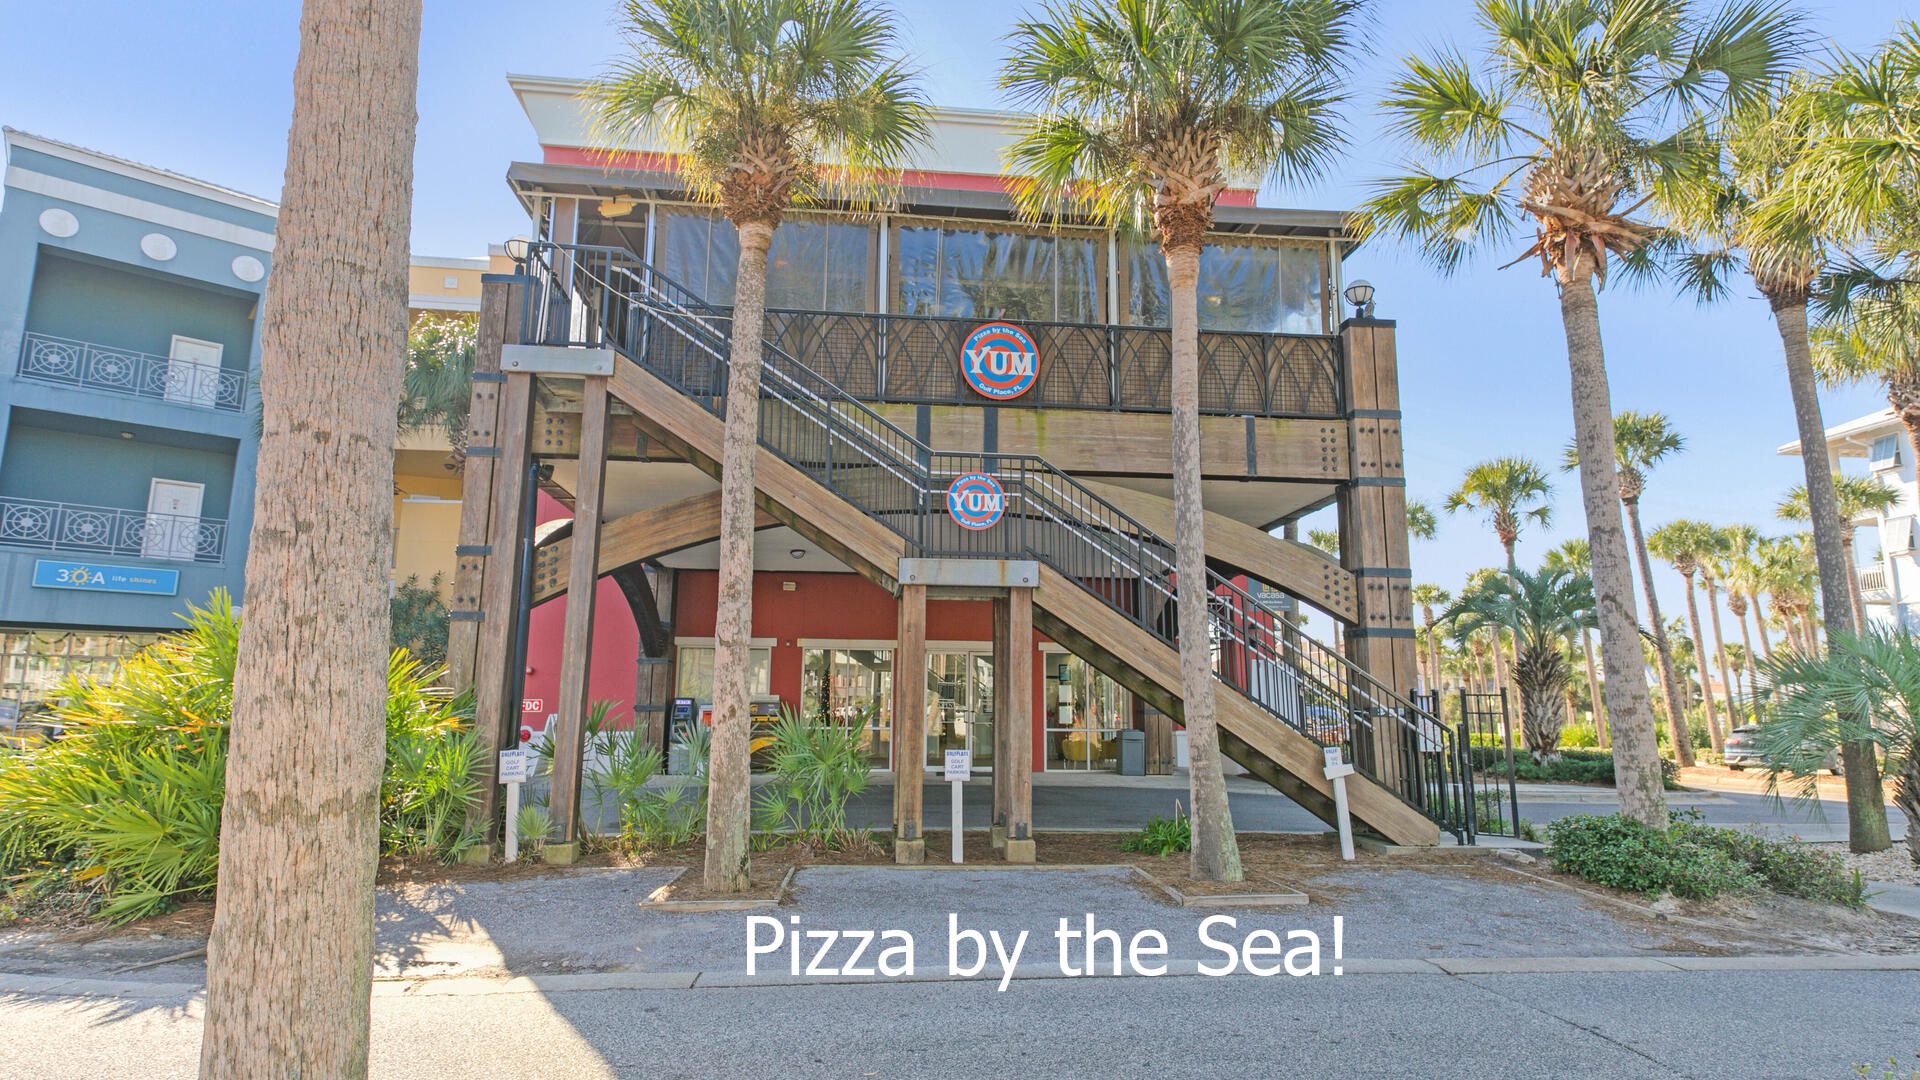 Nearby dining, shopping and activities at Gulf Place!